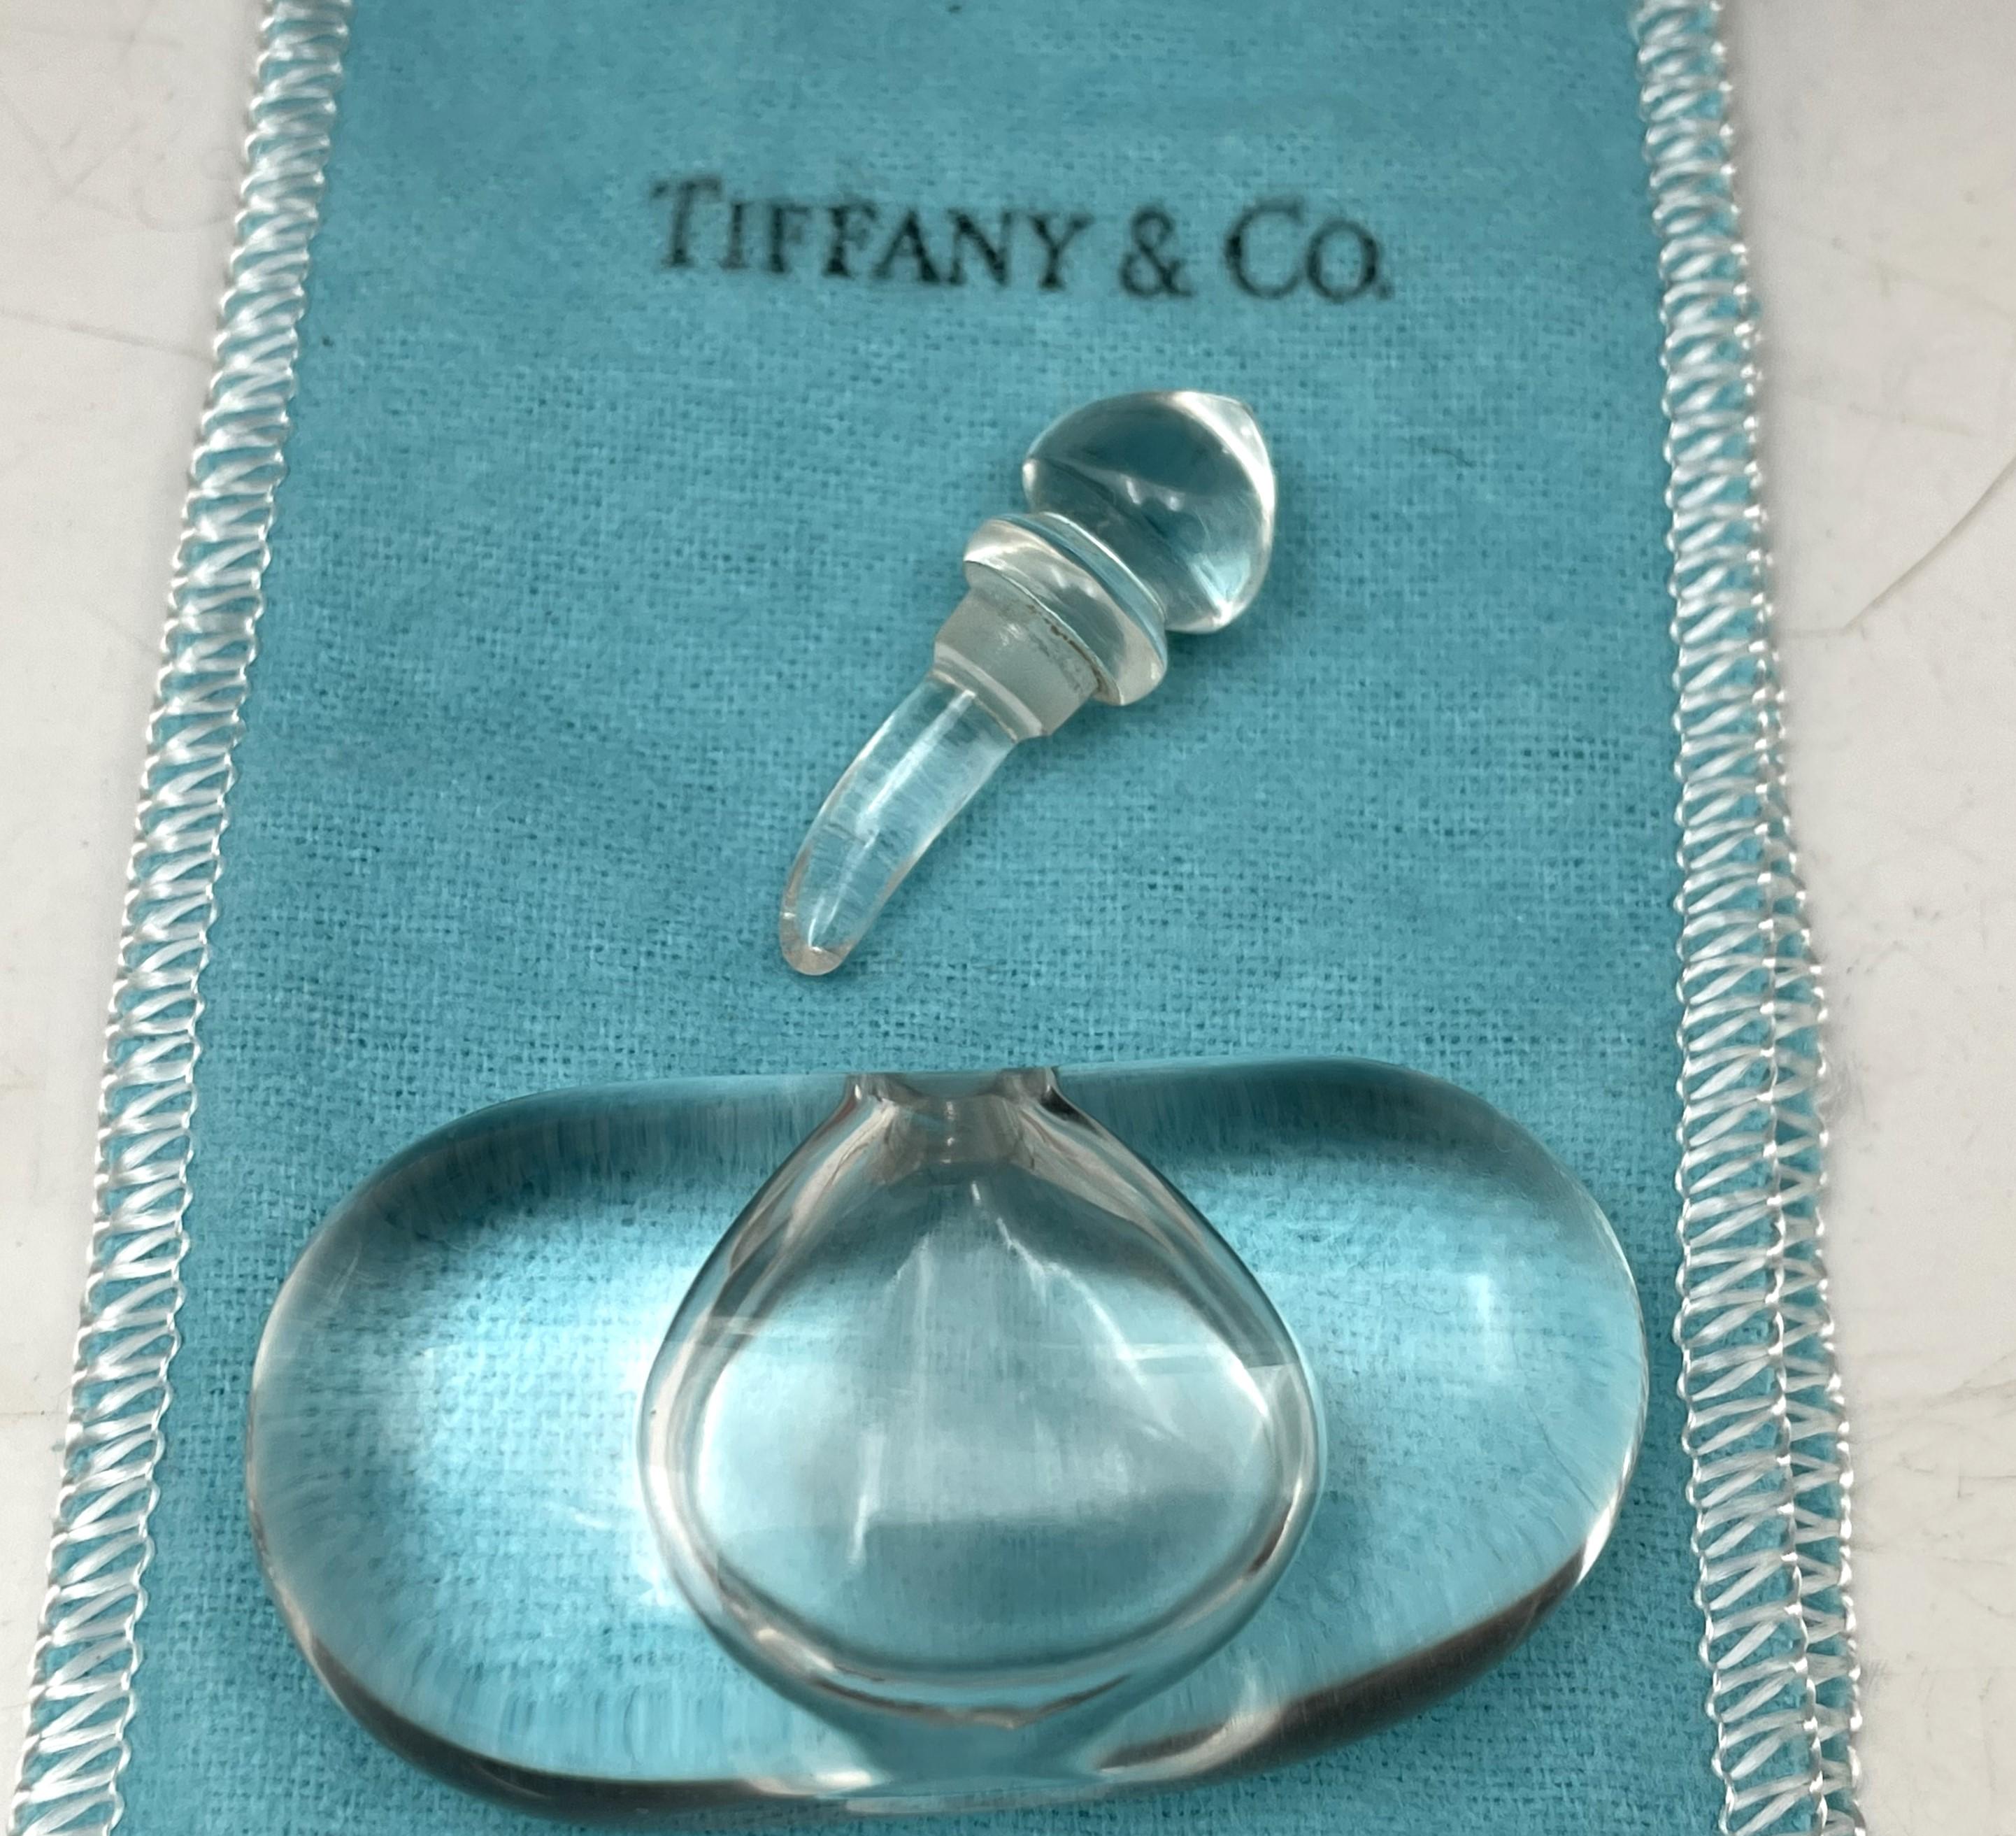 Elsa Peretti for Tiffany & Co. 1981 limited edition perfume bottle made of rock crystal. This elegant bottle contains one eight of a fluid ounce, measures 1 1/3'' in height by 2 1/4'' by 2/3'' in depth, is sold with an original Tiffany blue pouch,